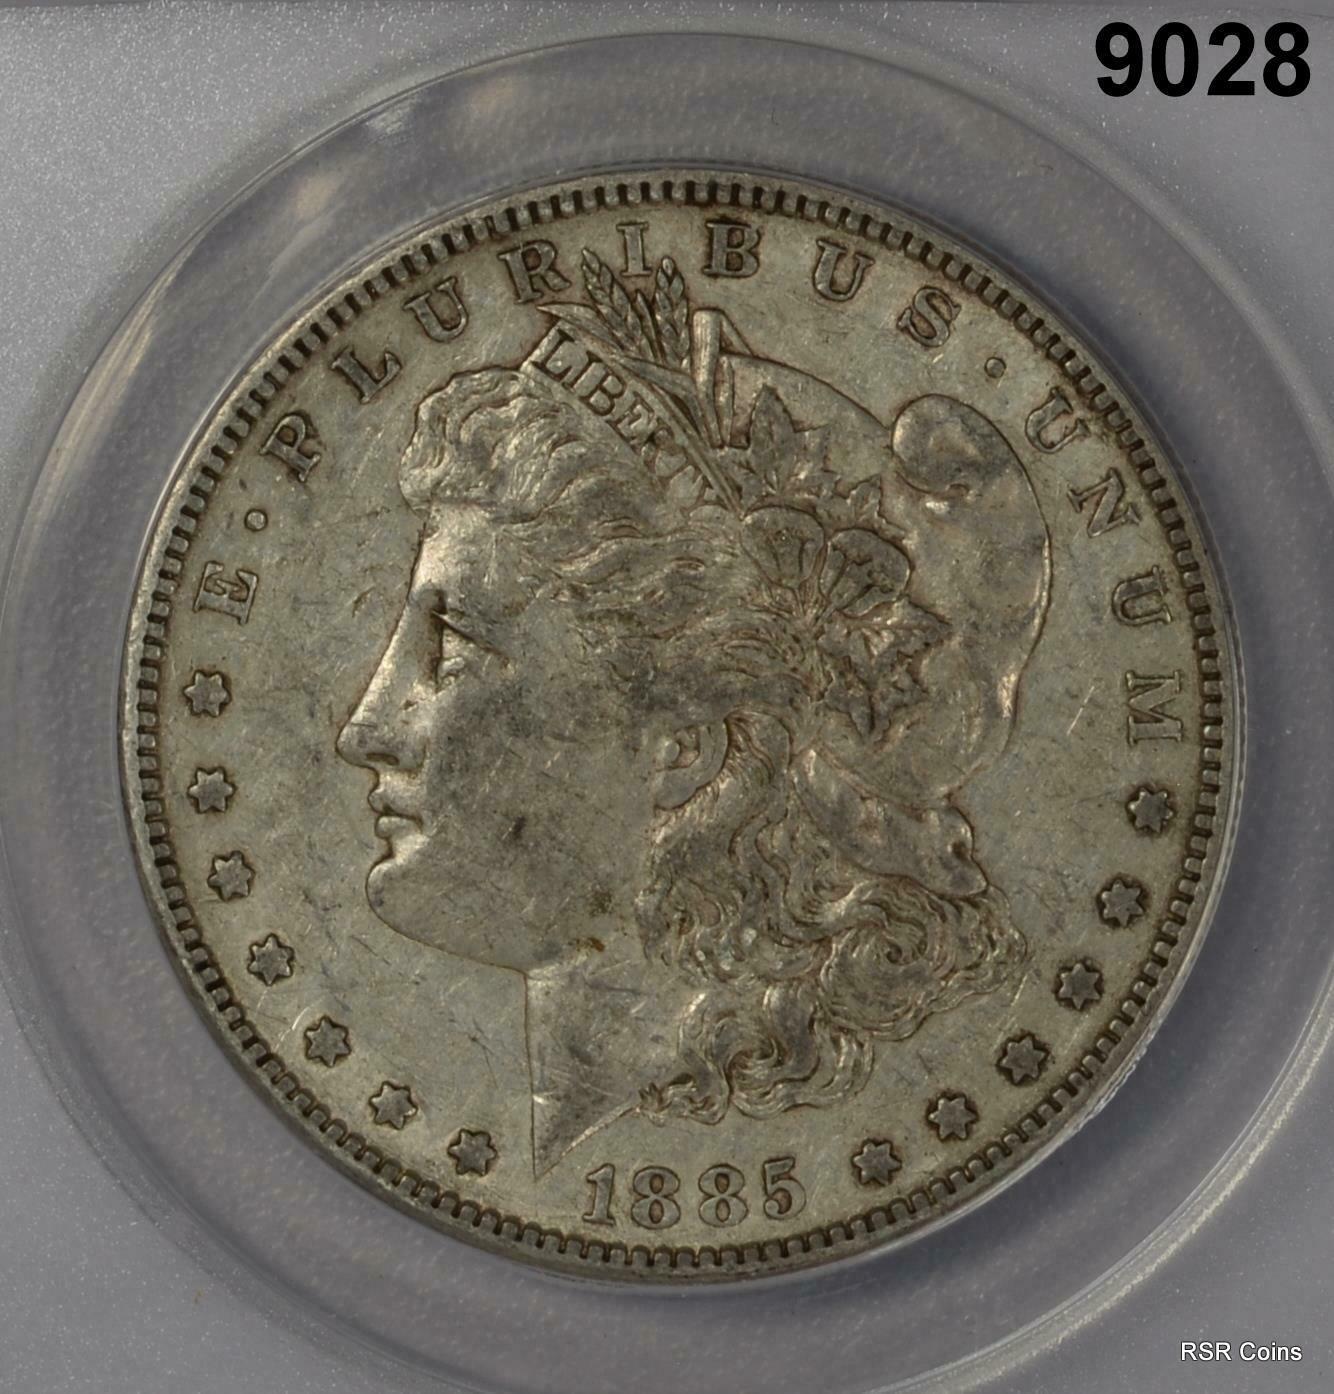 1885 S MORGAN SILVER DOLLAR ANACS CERTIFIED EF45 LOOKS BETTER! RARE DATE! #9028